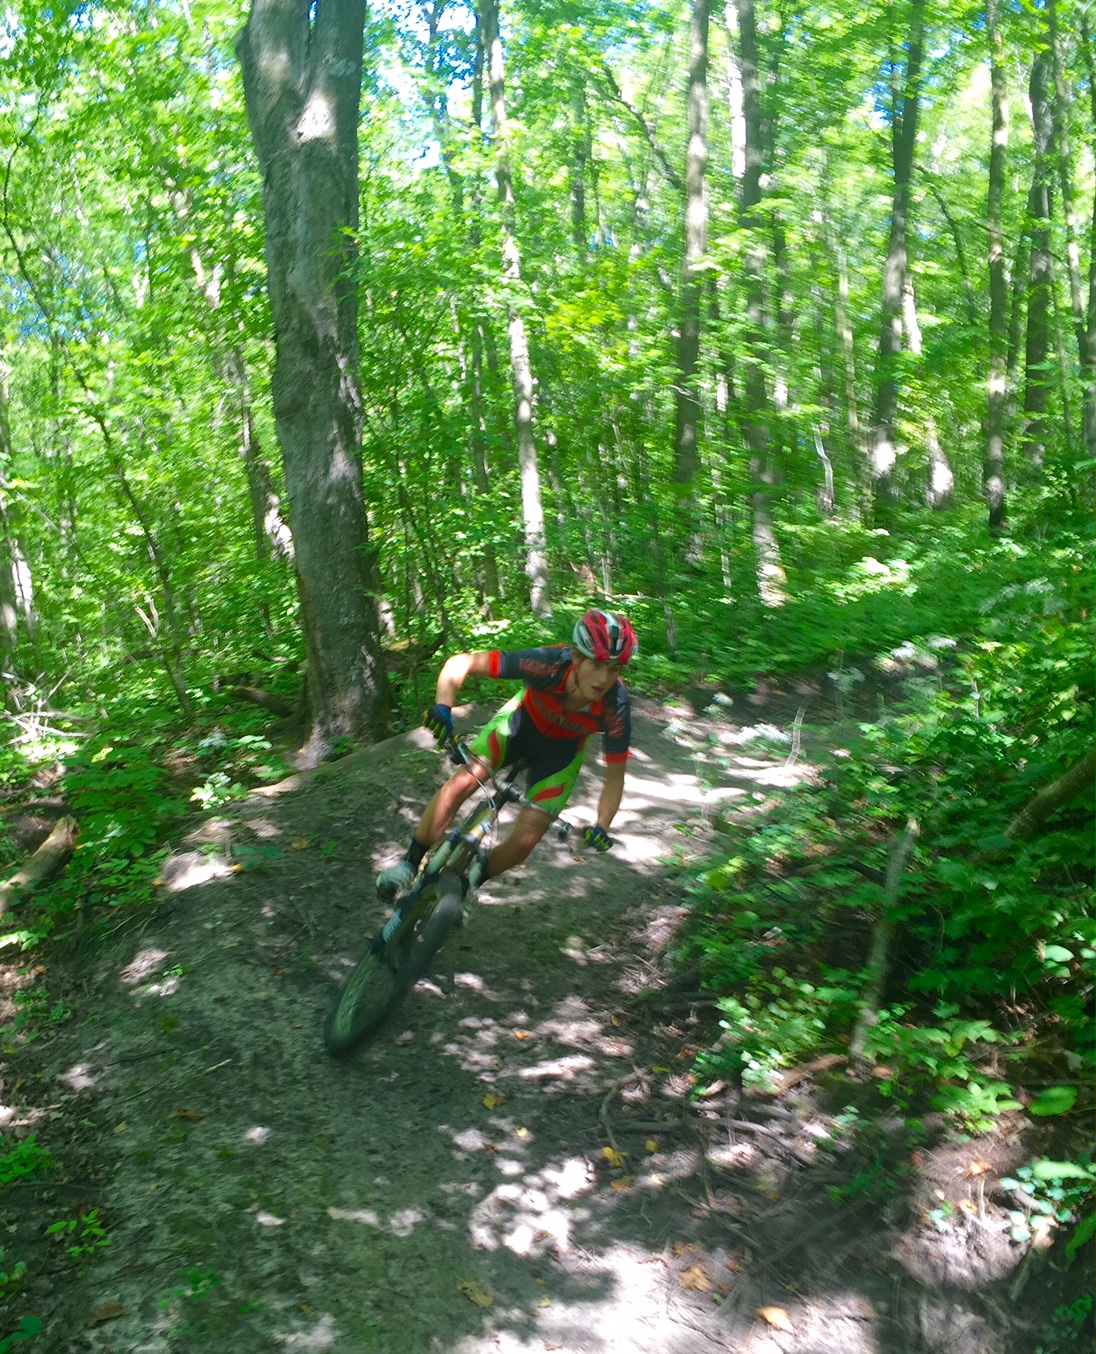 Berm action on Hudson's Hula segment on Twin Lakes singletrack. August 24th, 2016.